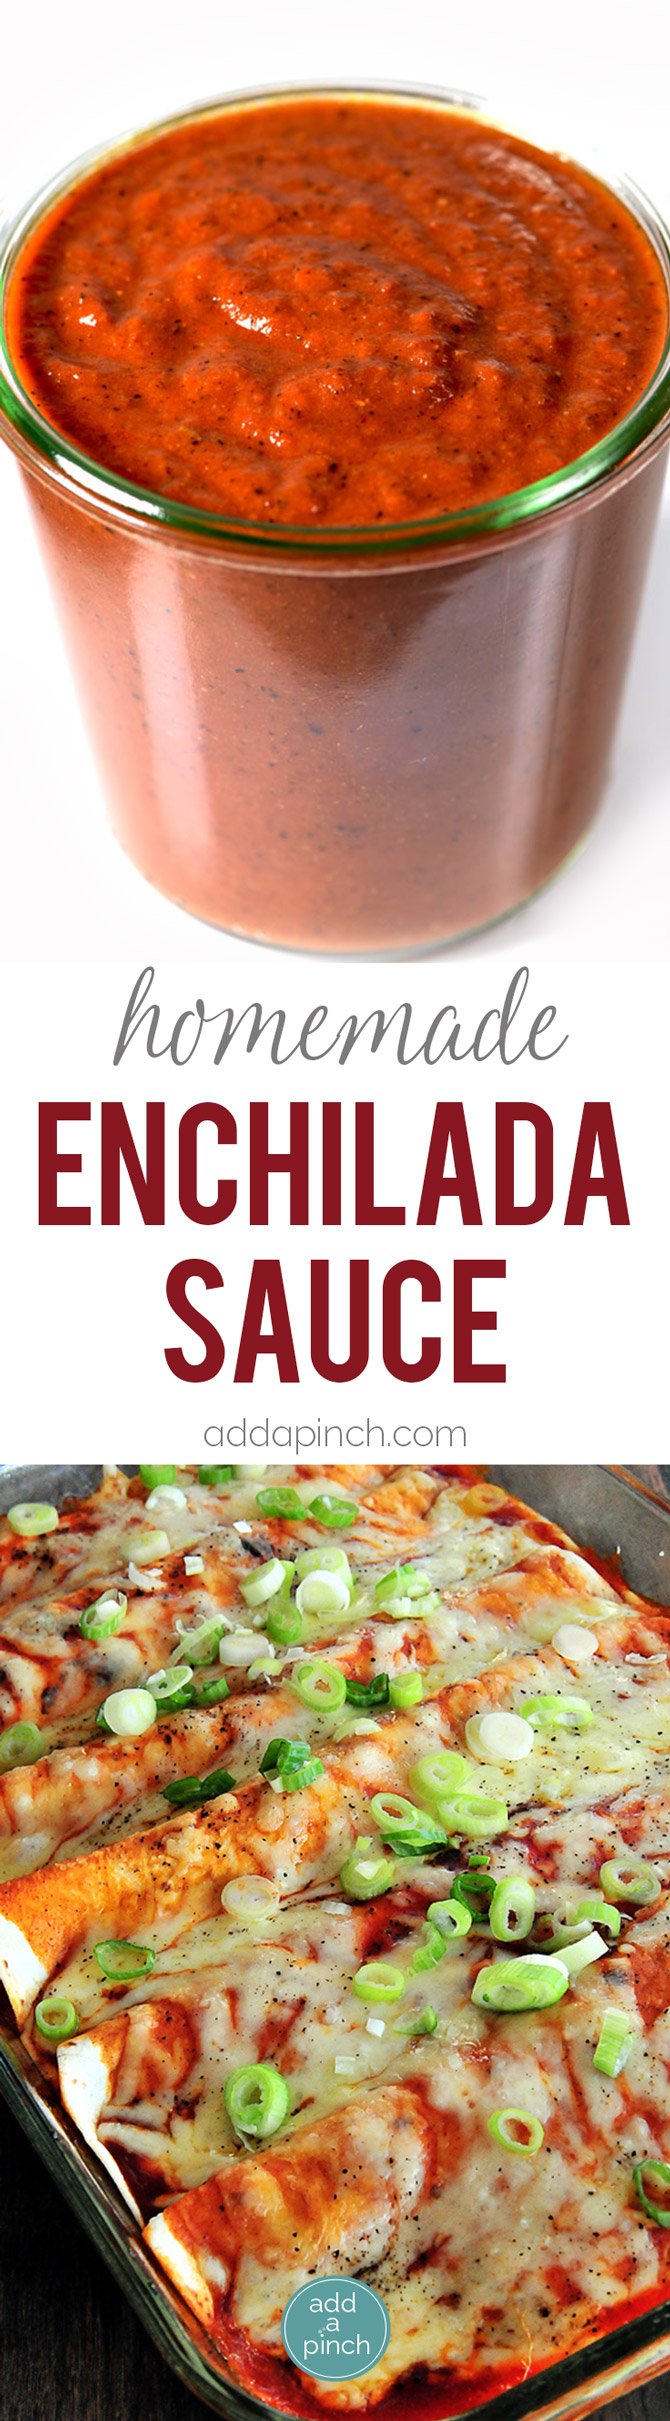 Enchilada Sauce Recipe - Enchilada Sauce makes a staple ingredient to keep on hand for quick meals. Get this family-favorite easy homemade enchilada sauce recipe. // addapinch.com